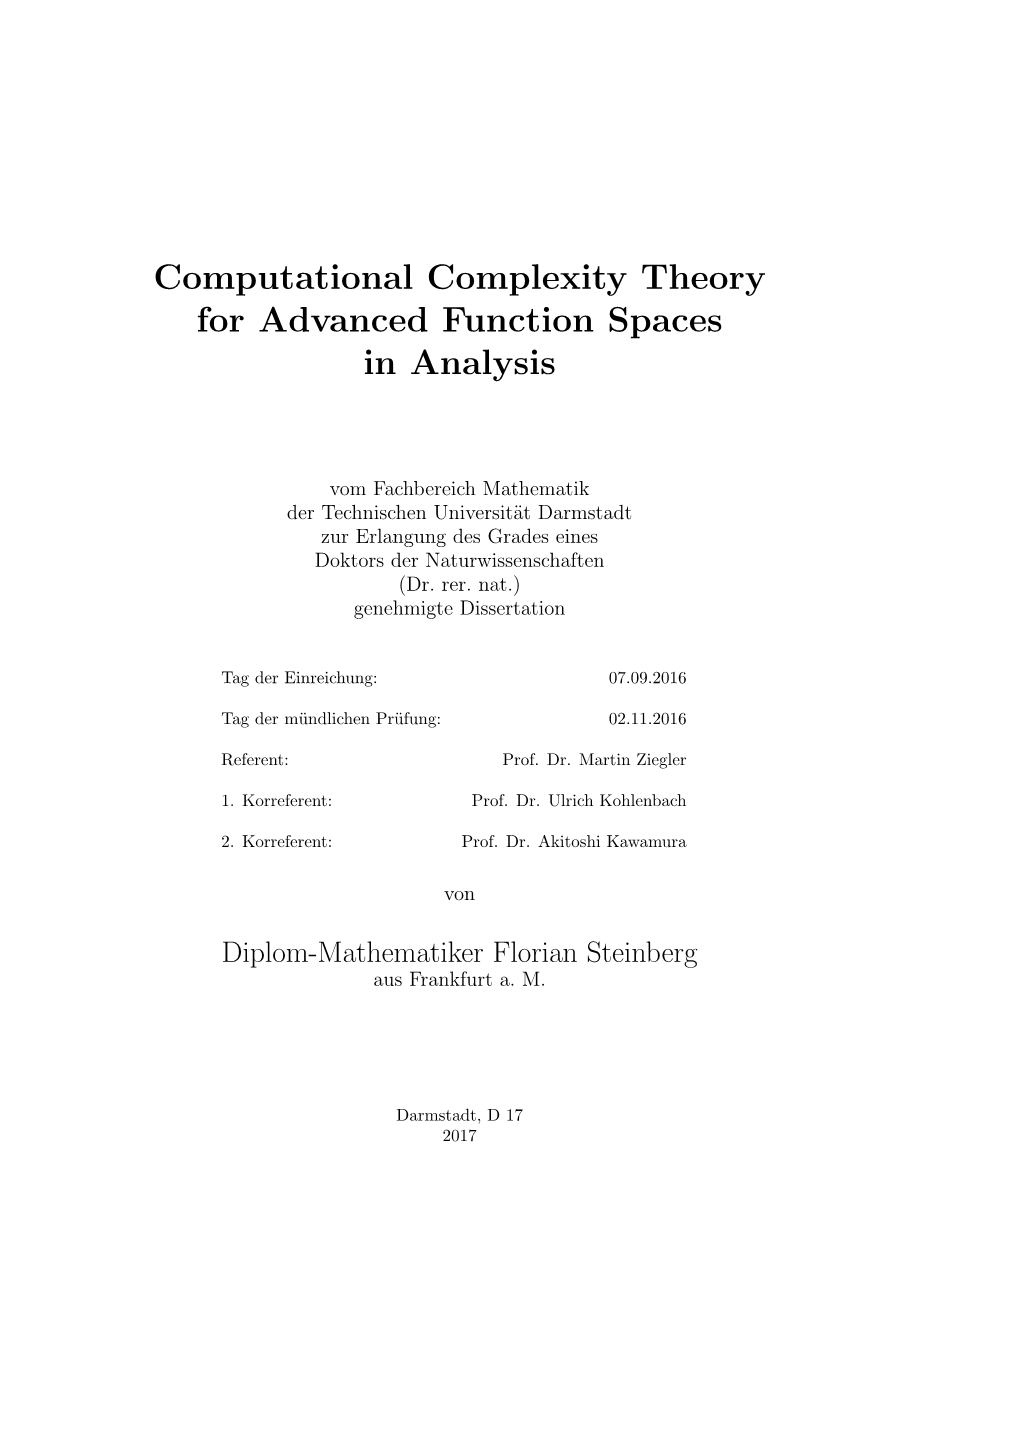 Computational Complexity Theory for Advanced Function Spaces in Analysis